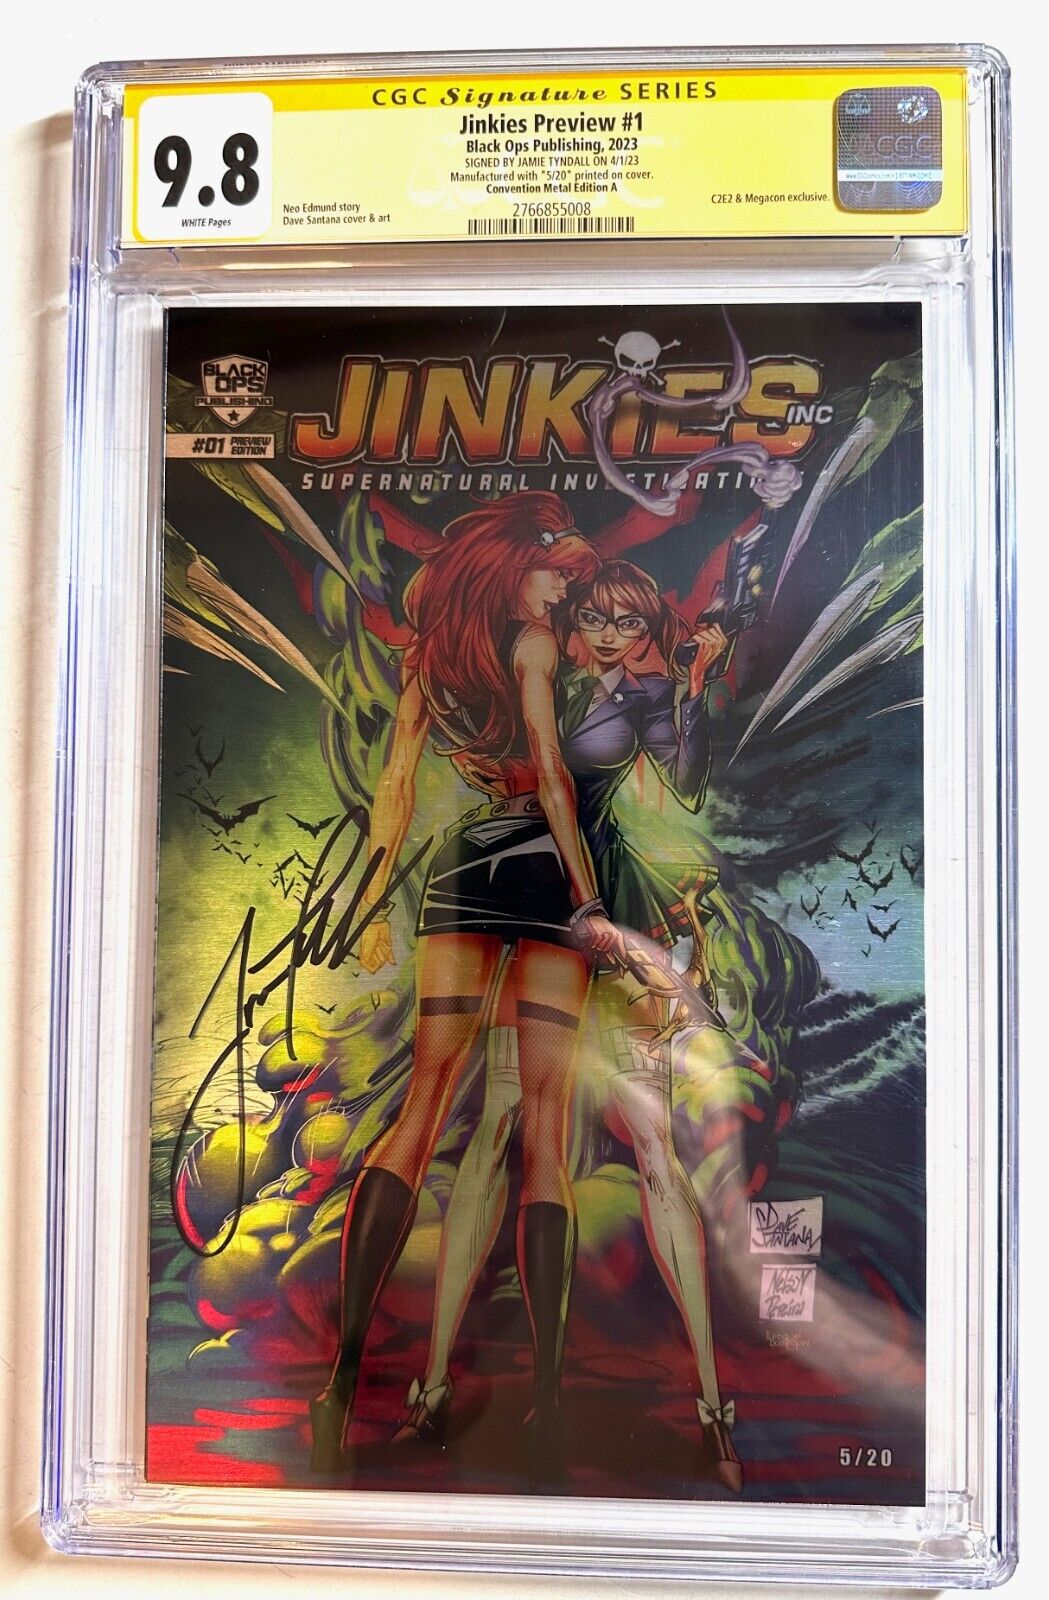 BLACK OPS JINKIES PREVIEW #1 CONV METAL LTD Variant CGC SS 9.8 Signed Tyndall